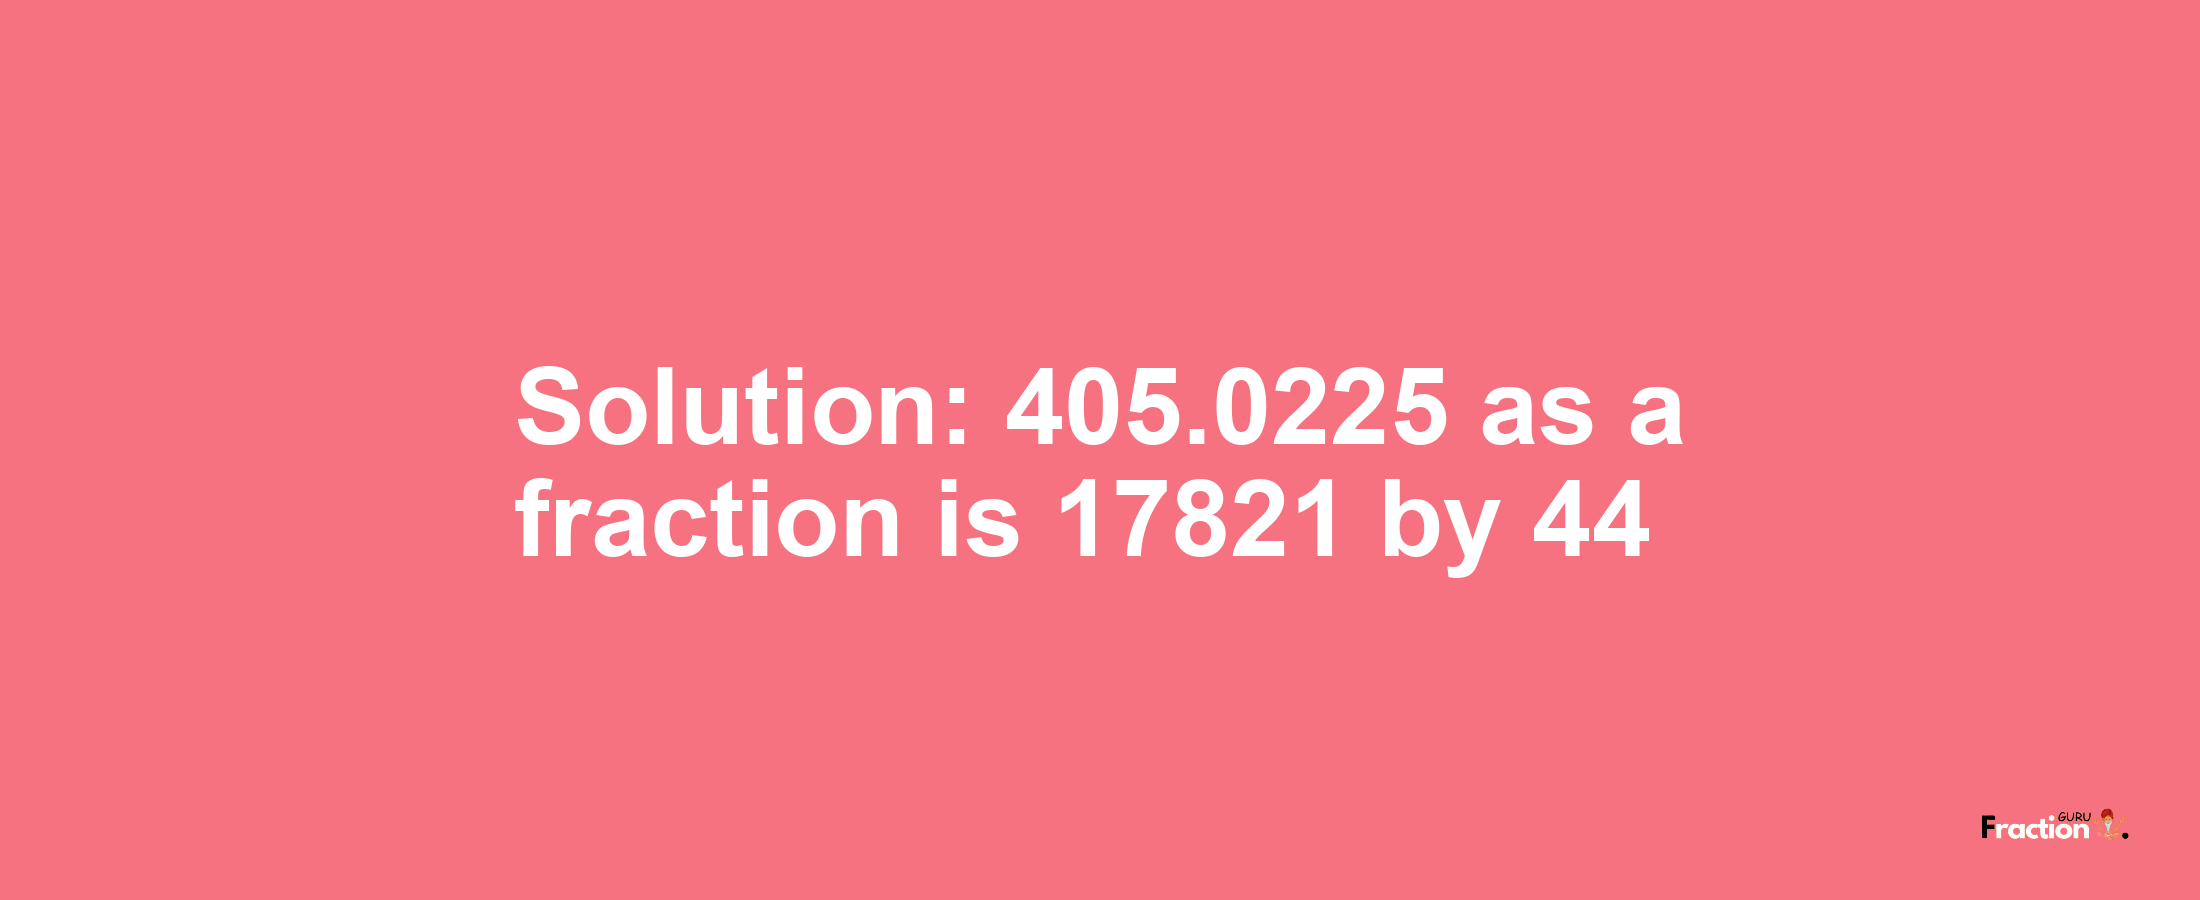 Solution:405.0225 as a fraction is 17821/44